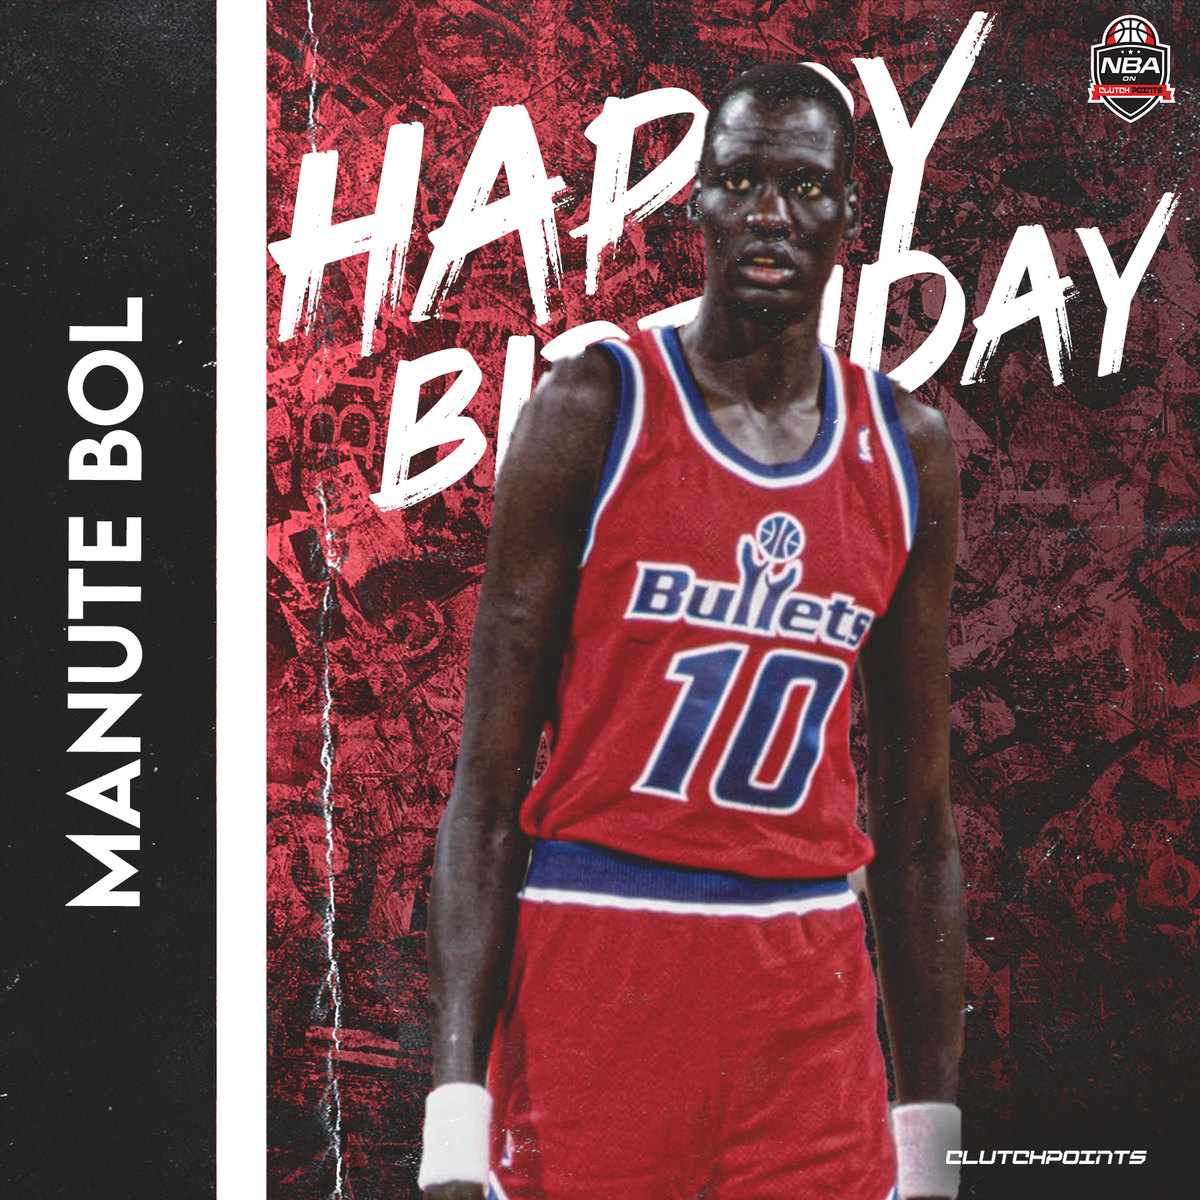 Manute Bol would have been 59 today.

Happy Birthday, Manute! 